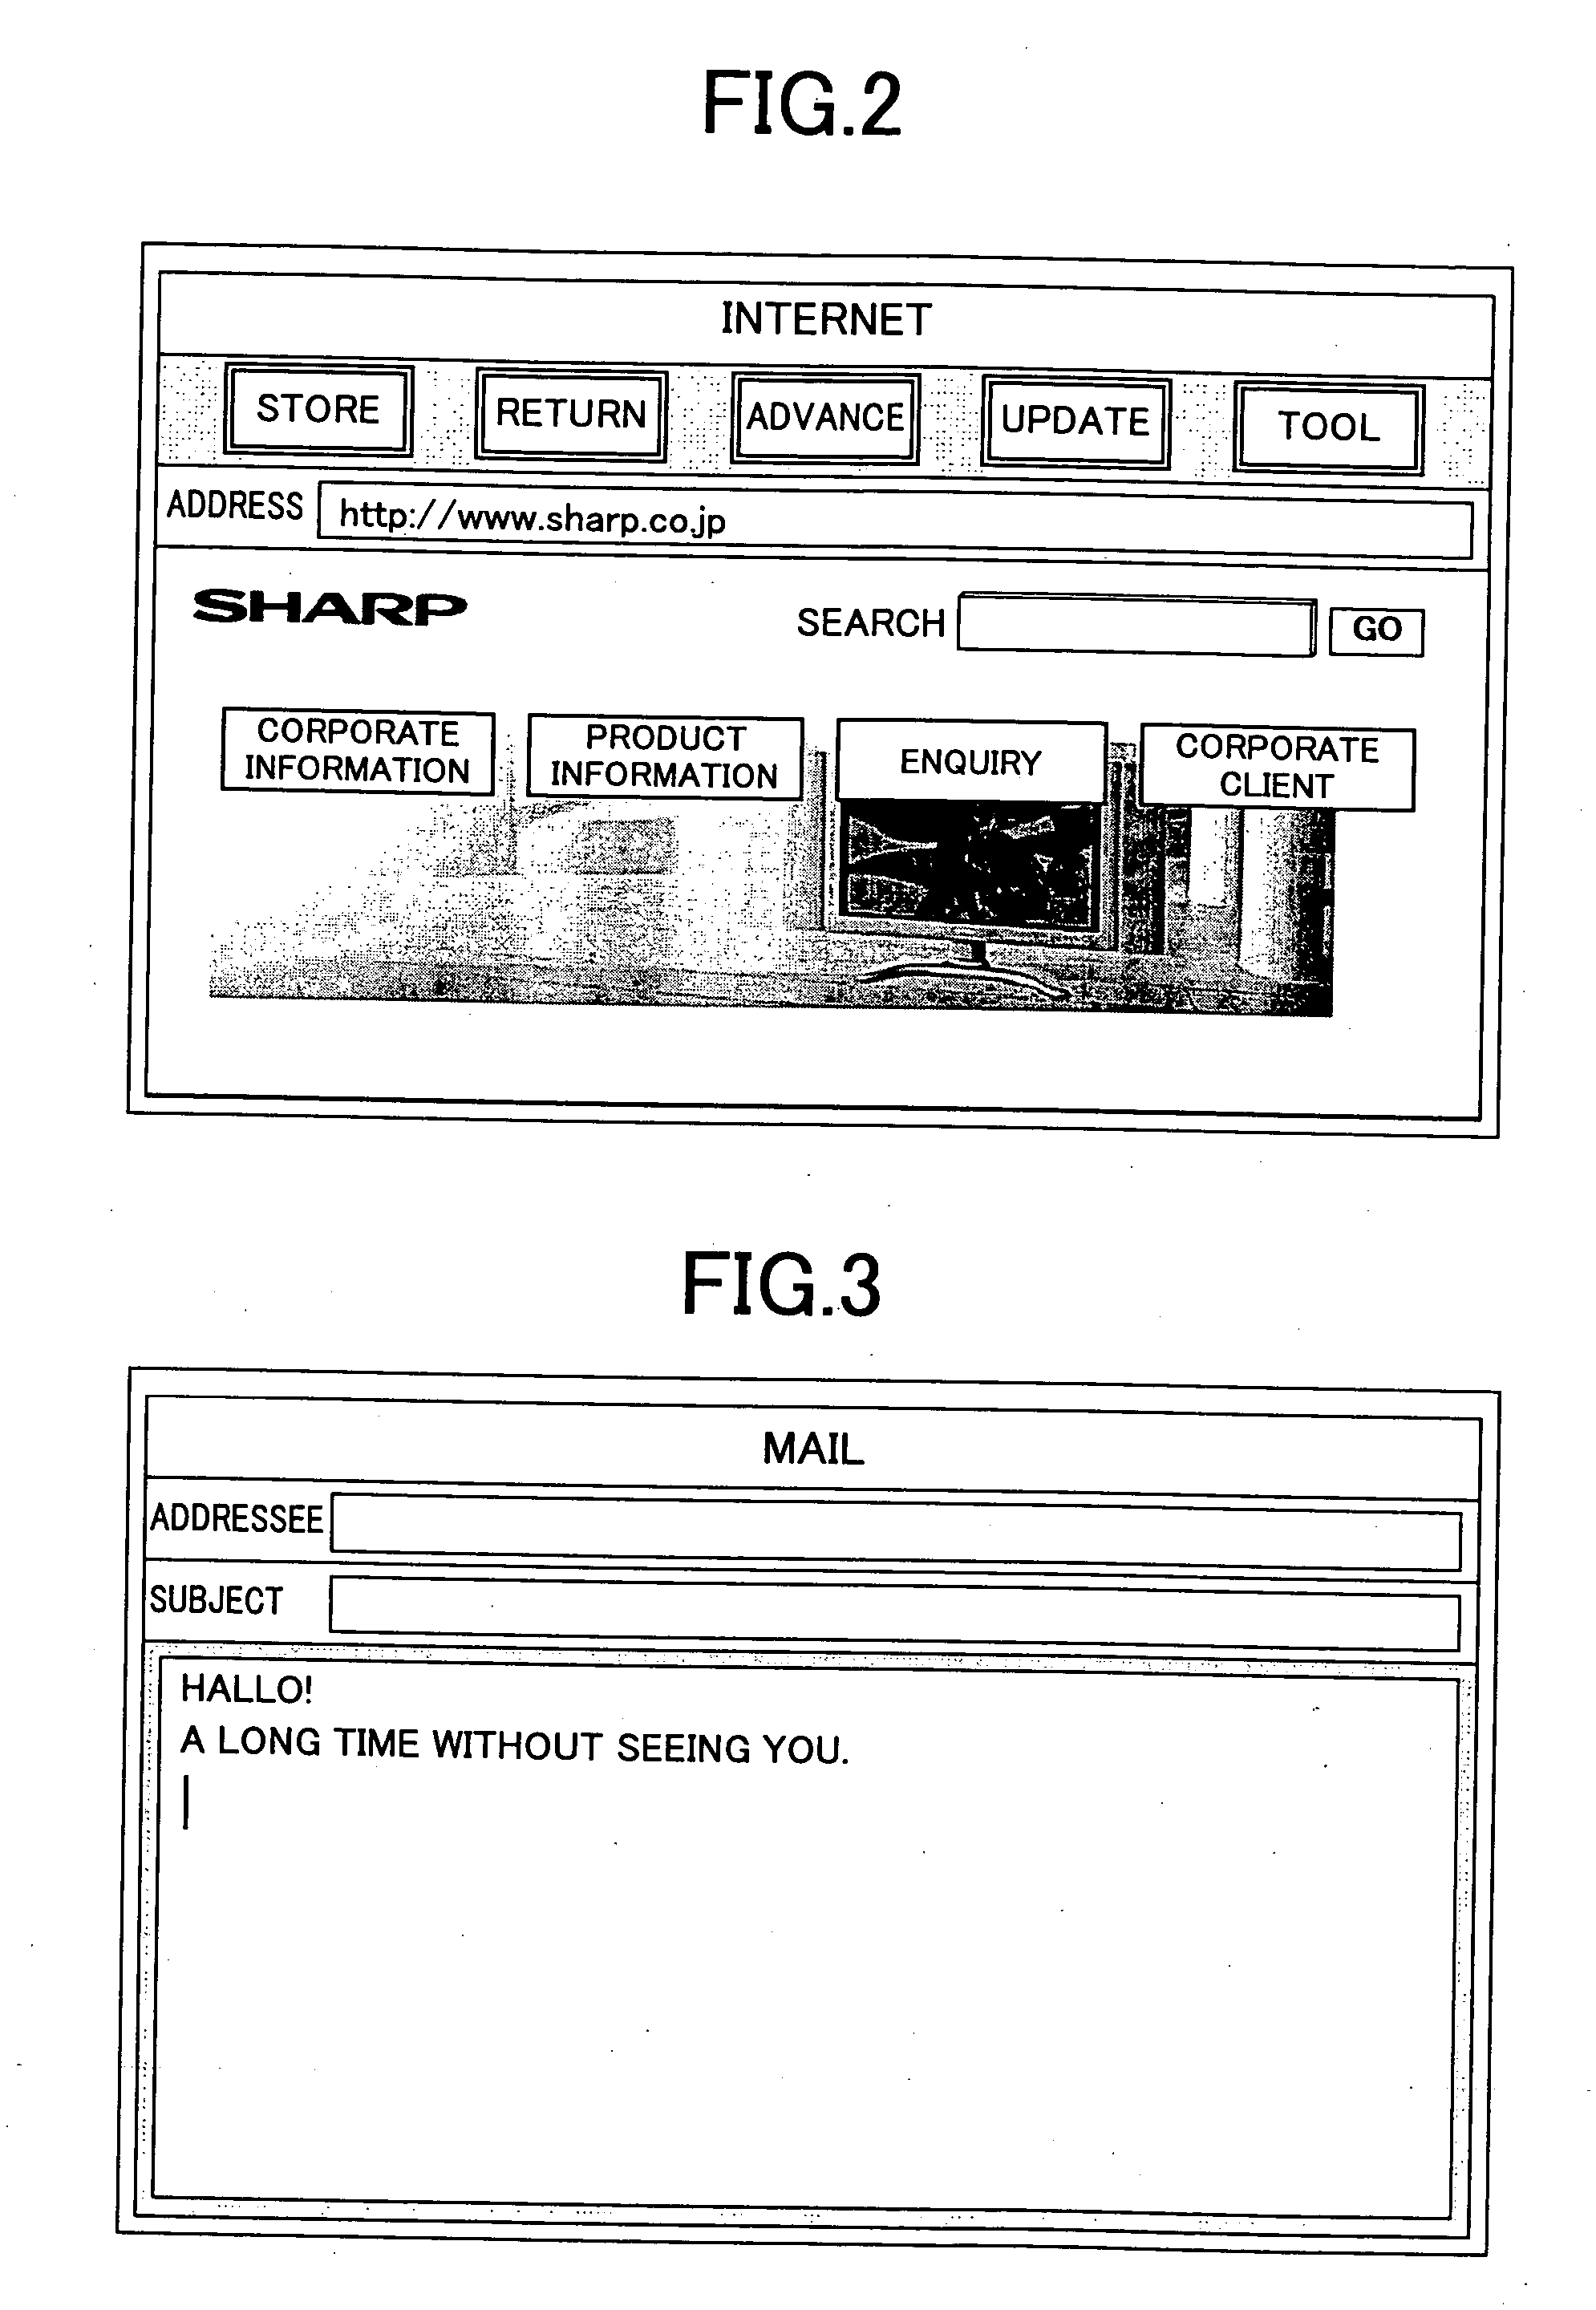 Image display device, image display method, and television receiver